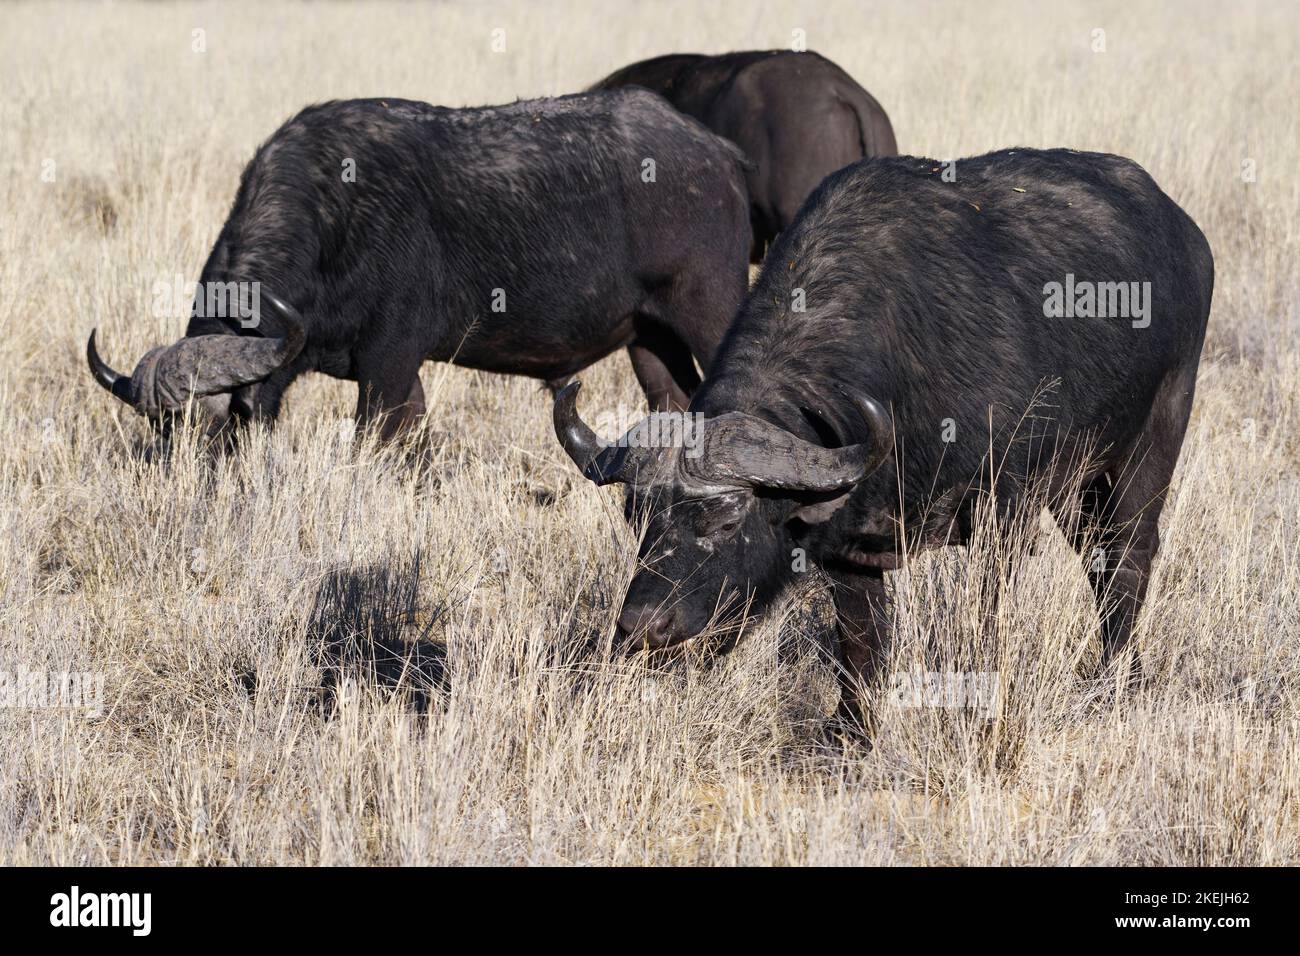 Cape buffaloes (Syncerus caffer), group of adult males in tall dry grass, feeding on grass, Mahango Core Area, Bwabwata National Park, Namibia, Africa Stock Photo